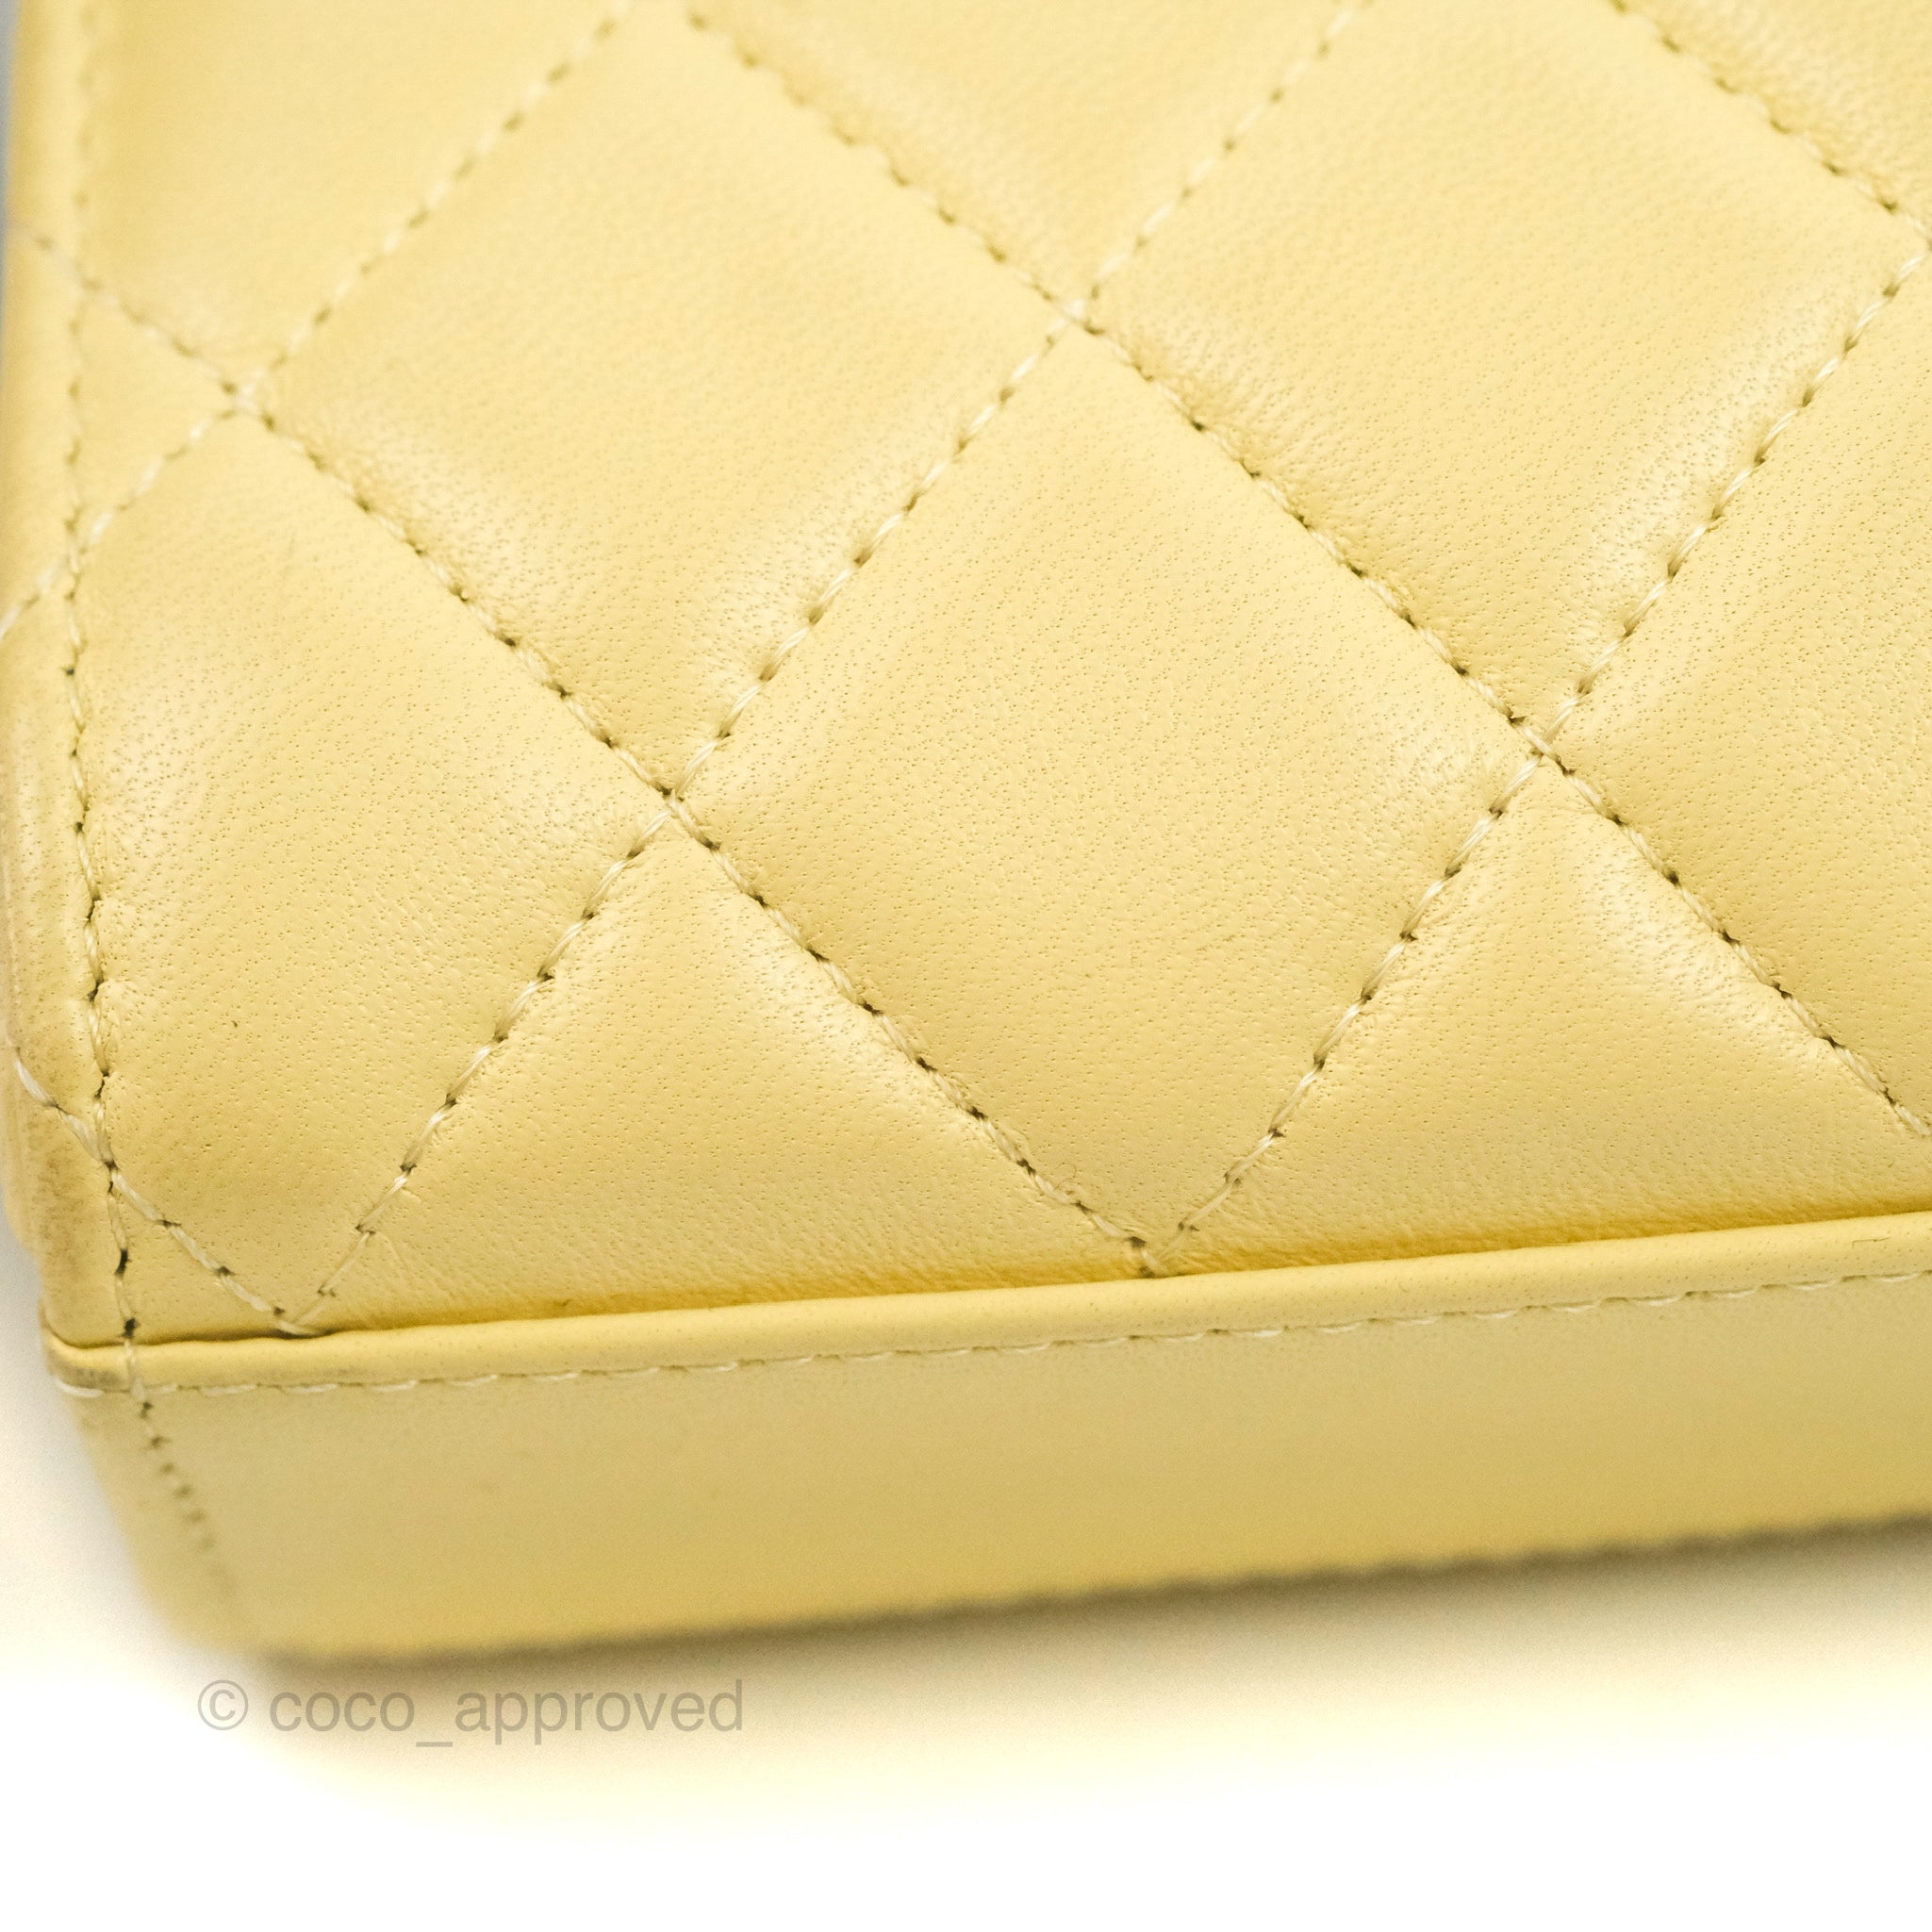 Chanel Classic Flap Phone Holder Bag Crossbody Chain Quilted Lambskin yellow